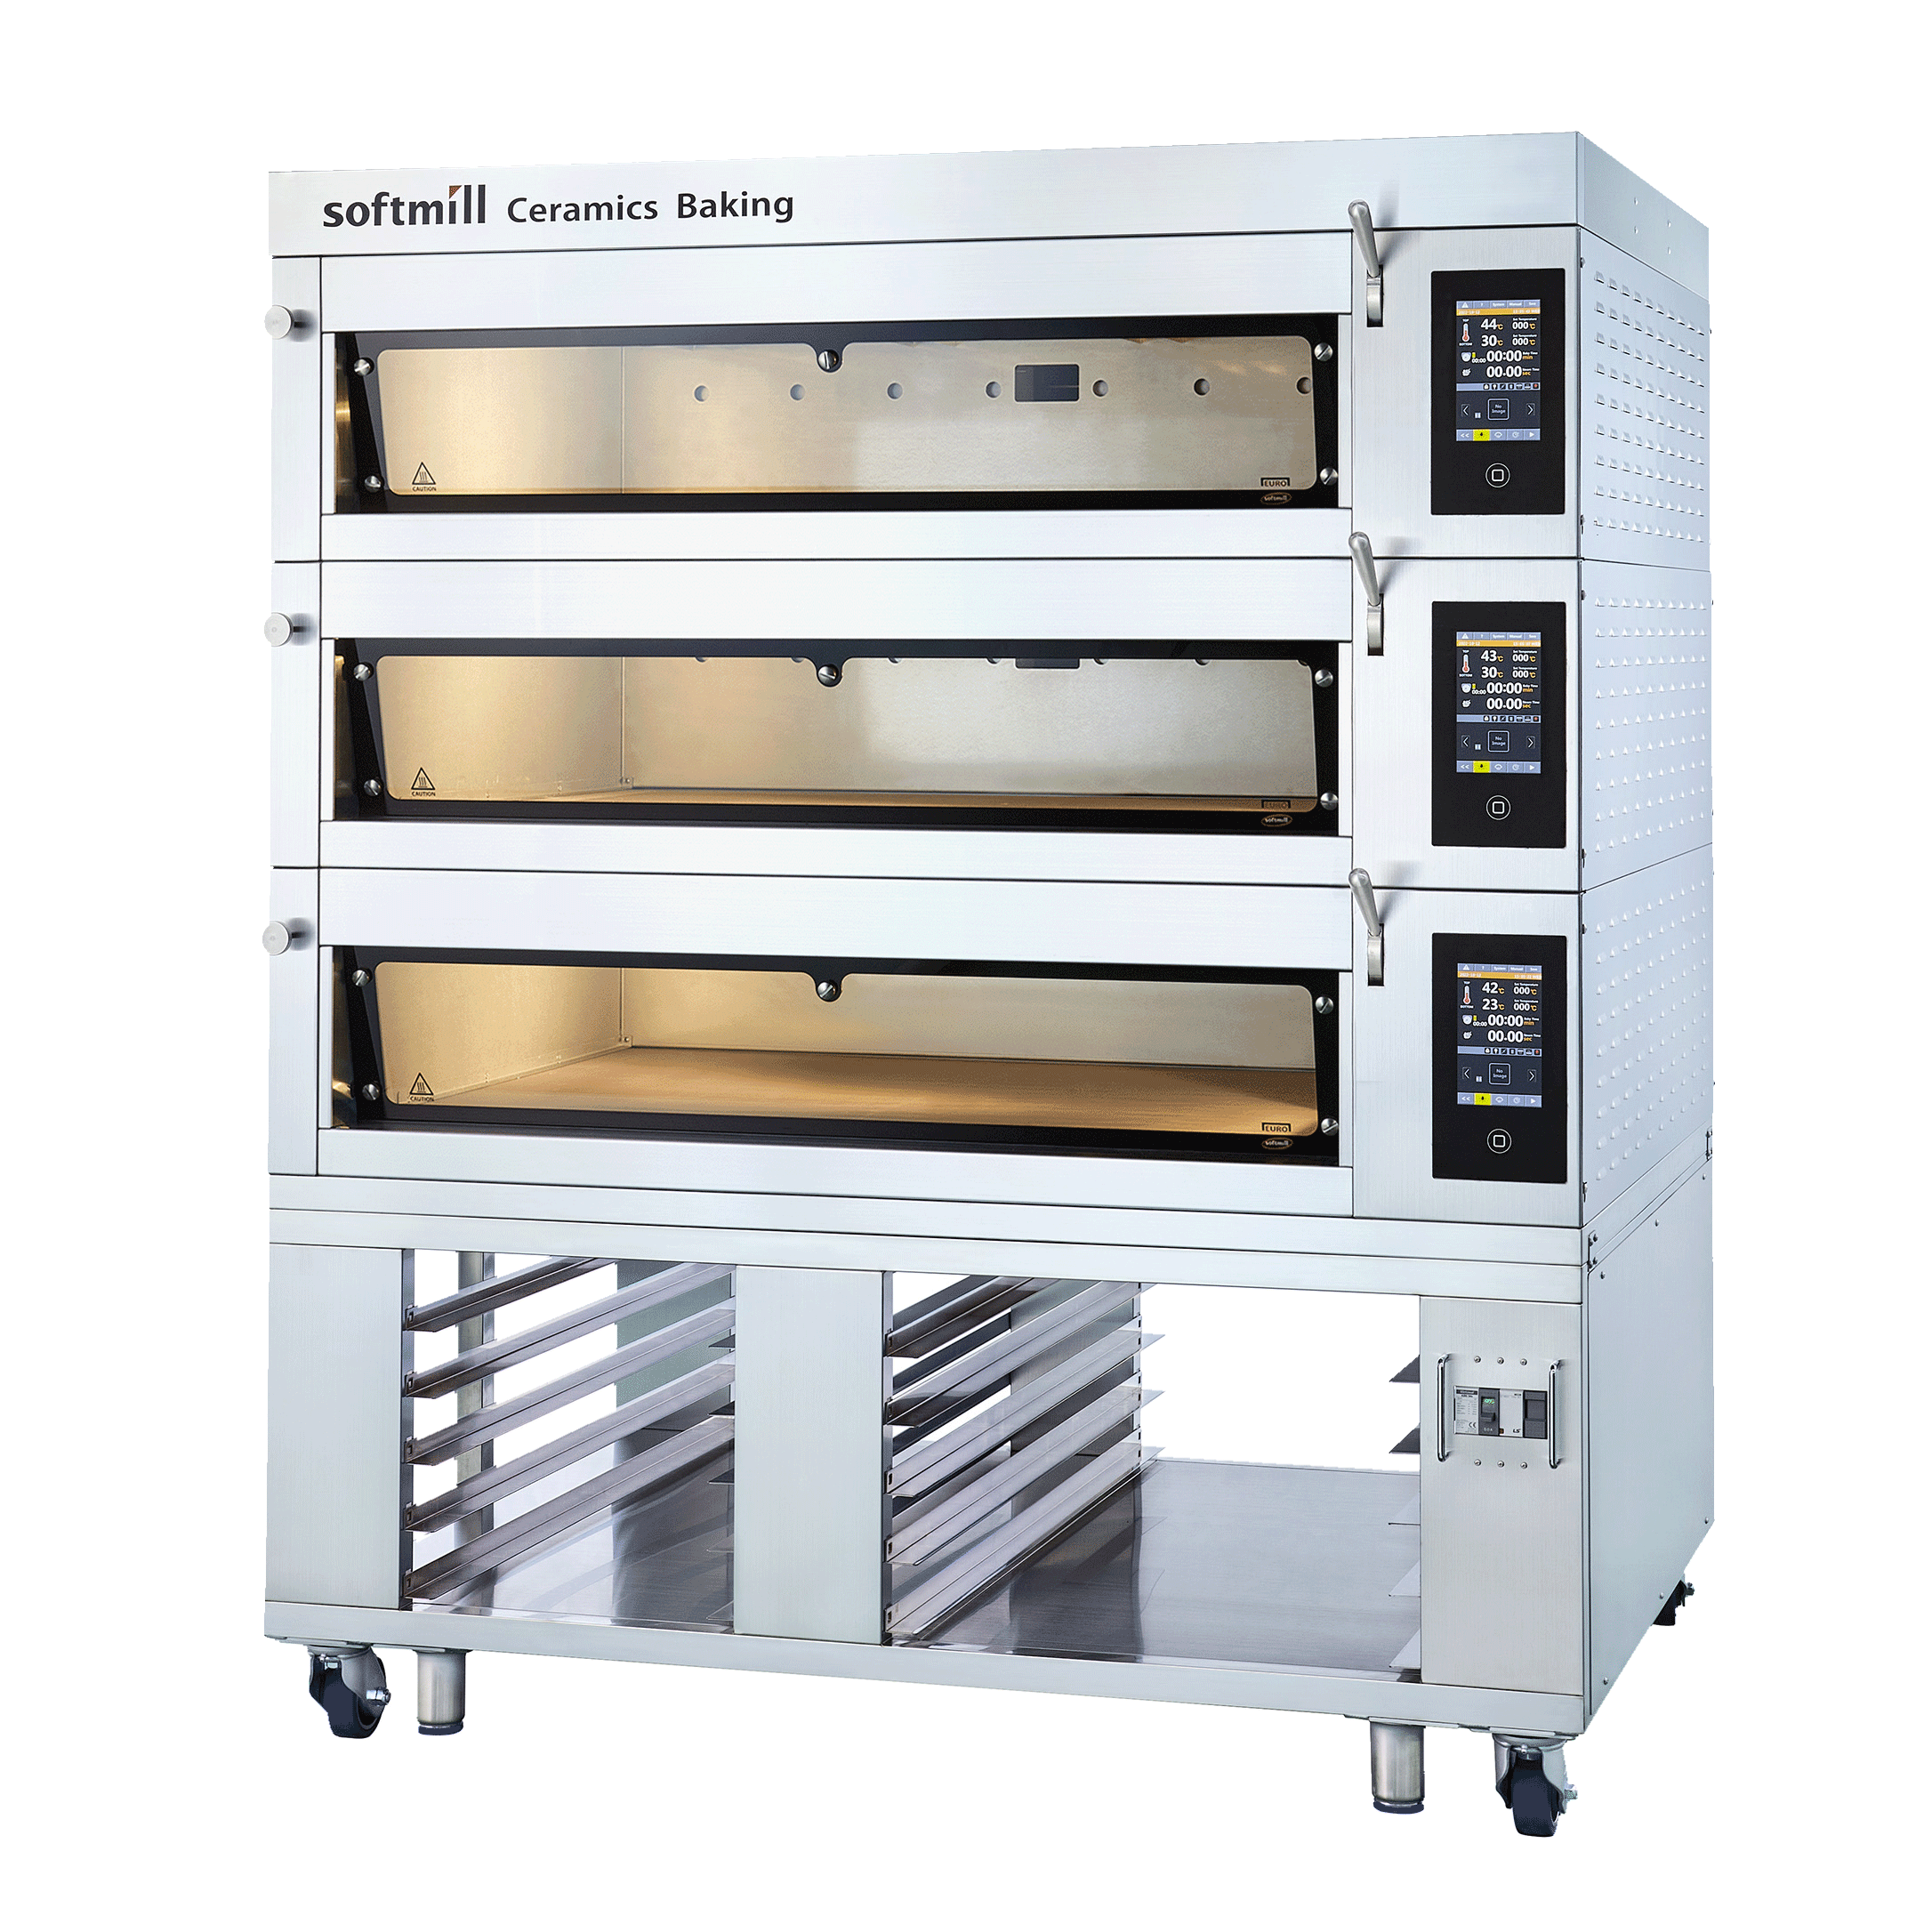 Euro-Baker Oven 4 trays 3 tiers detail page link